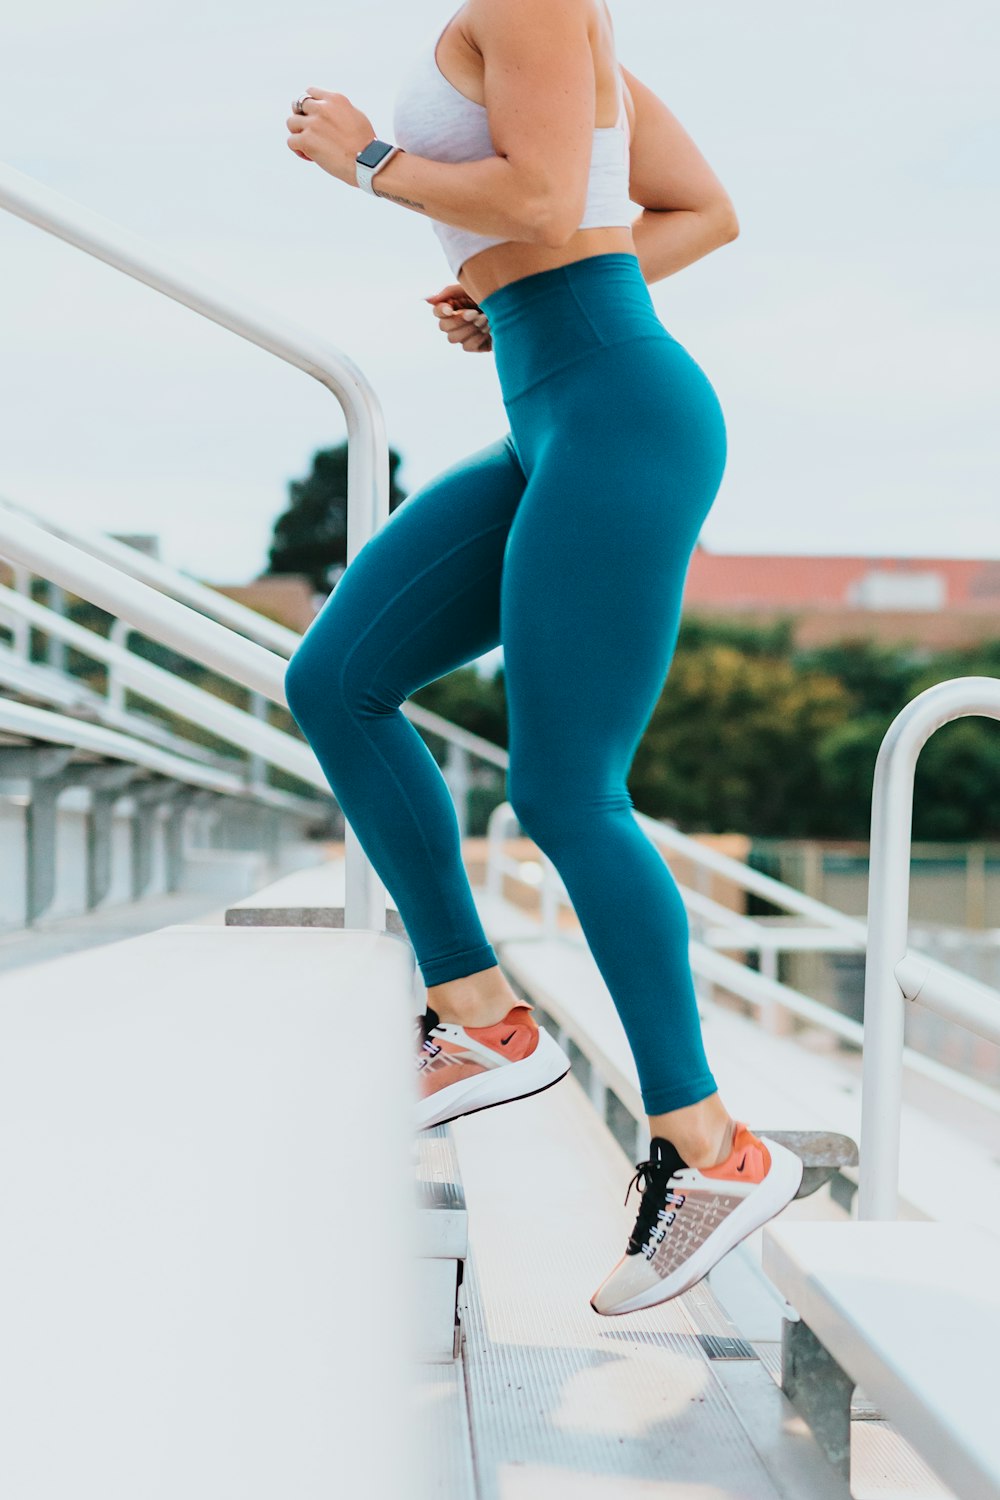 Women Fitness Pictures  Download Free Images on Unsplash